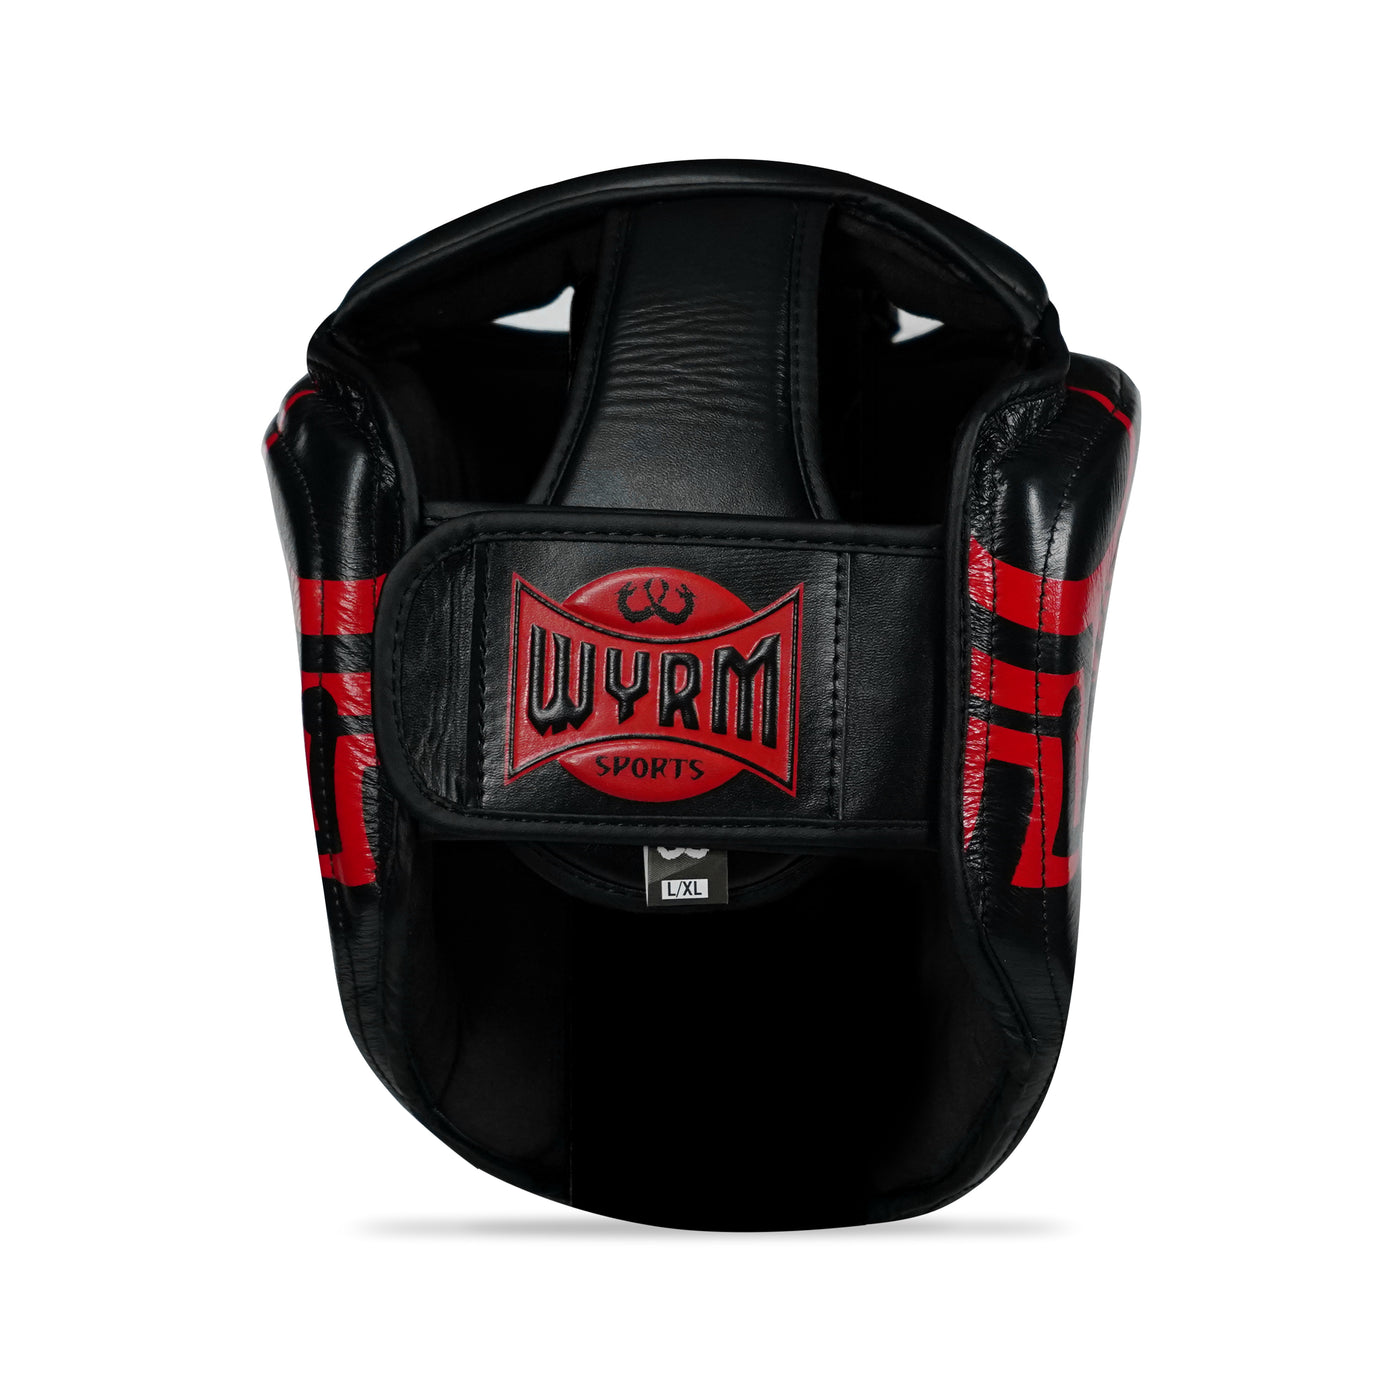 Pounder Red/Black Head Guard